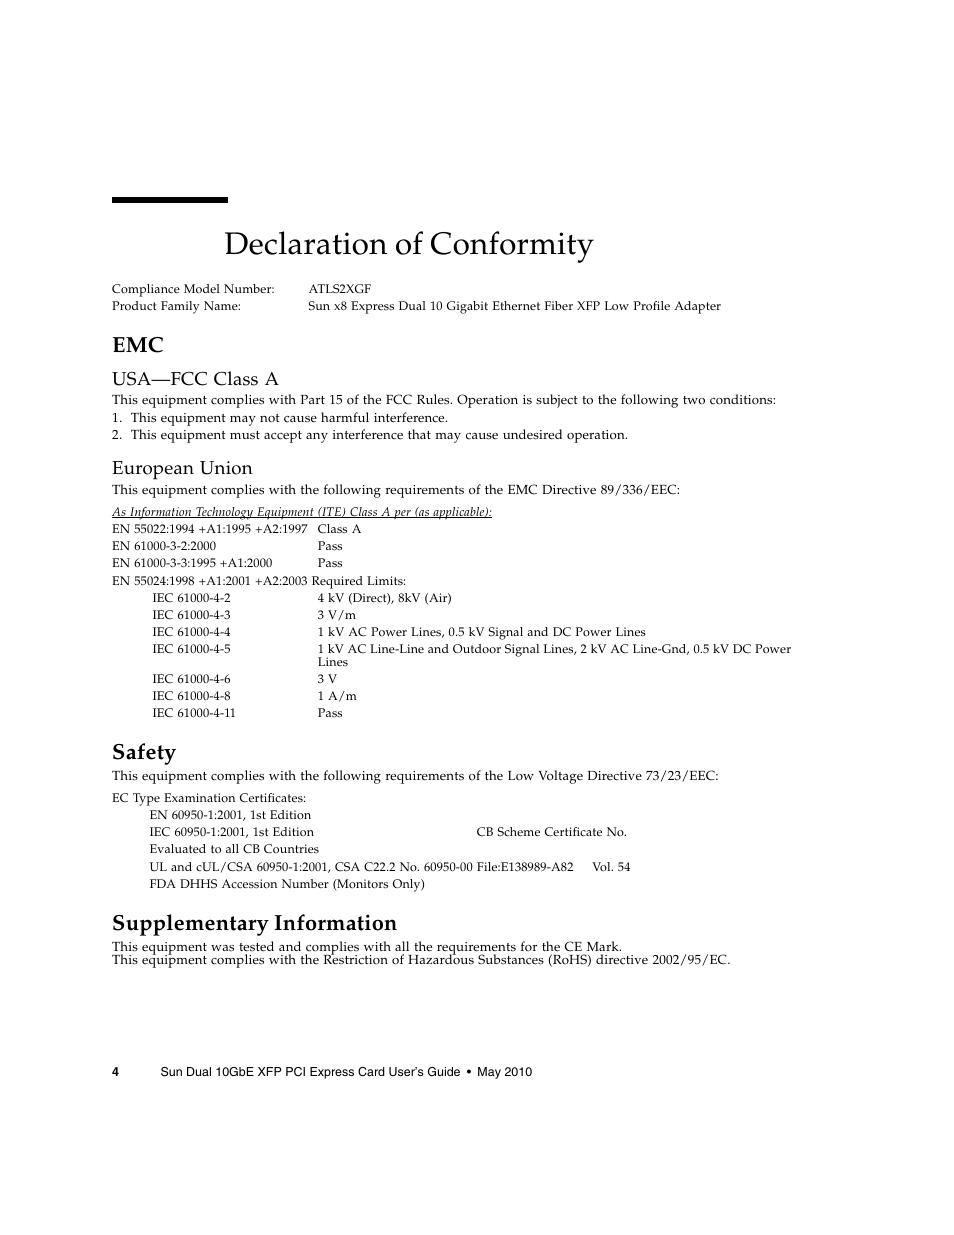 Declaration of conformity, Safety, Supplementary information | Usa—fcc class a, European union | Oracle Audio Technologies Sun Oracle SunDual 10GbE XFP User Manual | Page 14 / 86